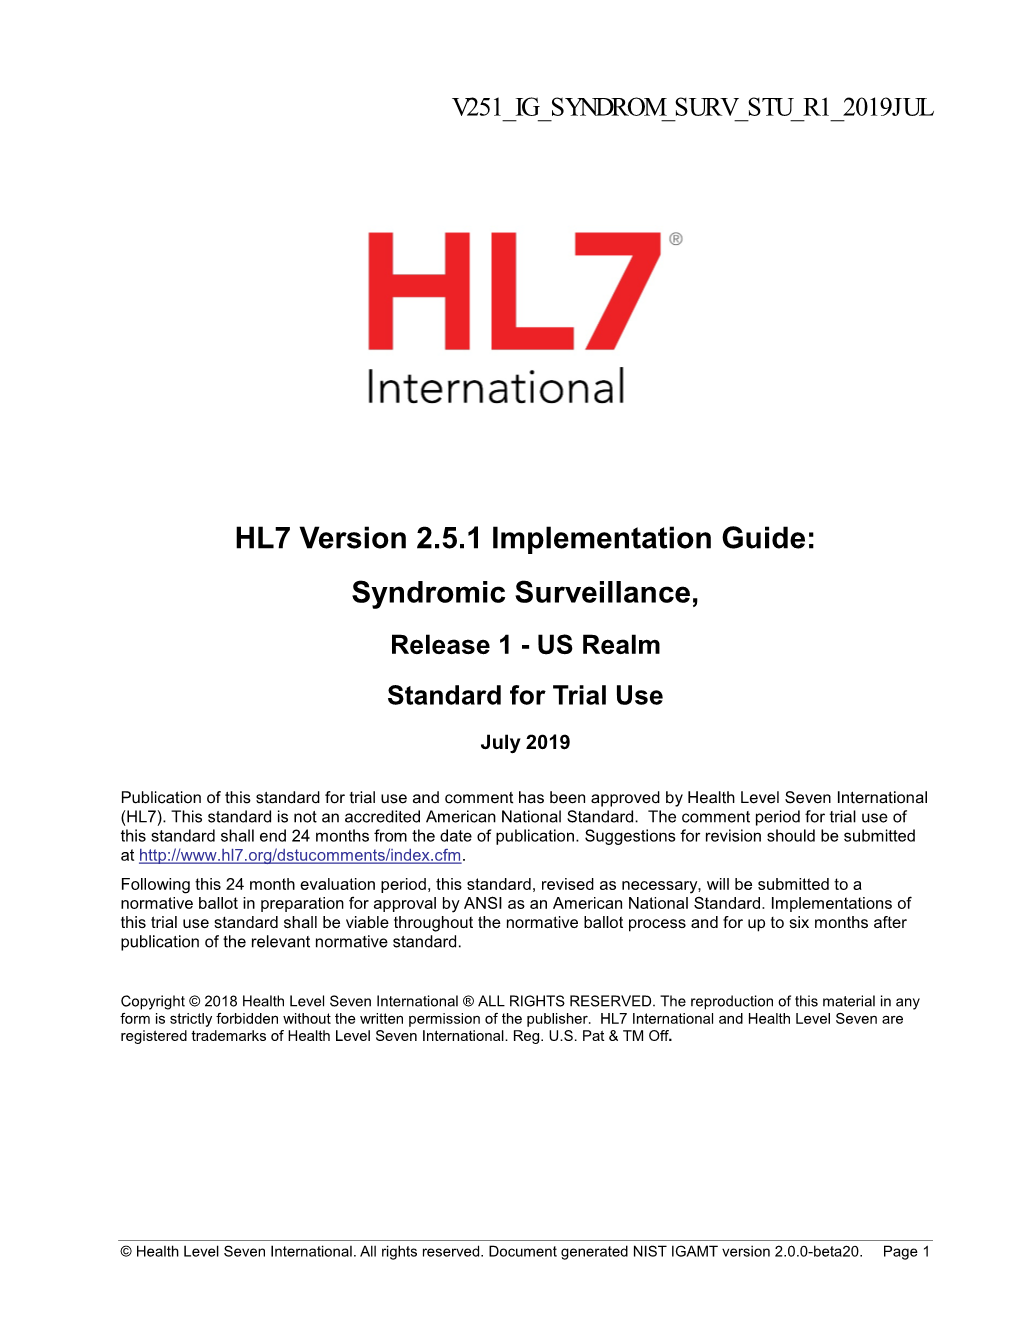 HL7 Version 2.5.1 Implementation Guide: Syndromic Surveillance, Release 1 - US Realm Standard for Trial Use